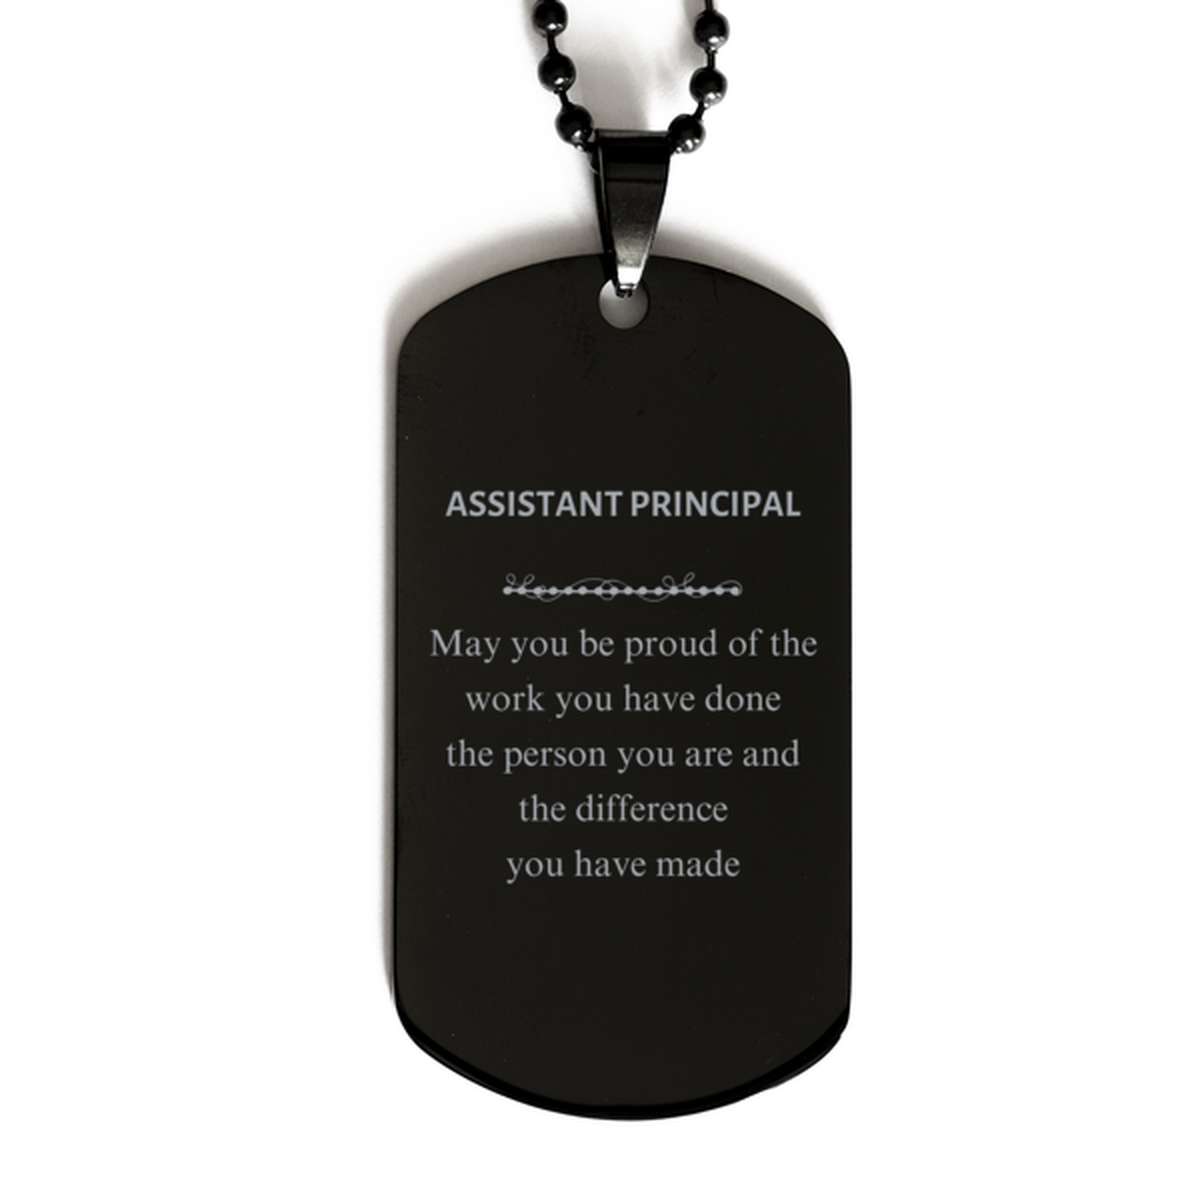 Assistant Principal May you be proud of the work you have done, Retirement Assistant Principal Black Dog Tag for Colleague Appreciation Gifts Amazing for Assistant Principal